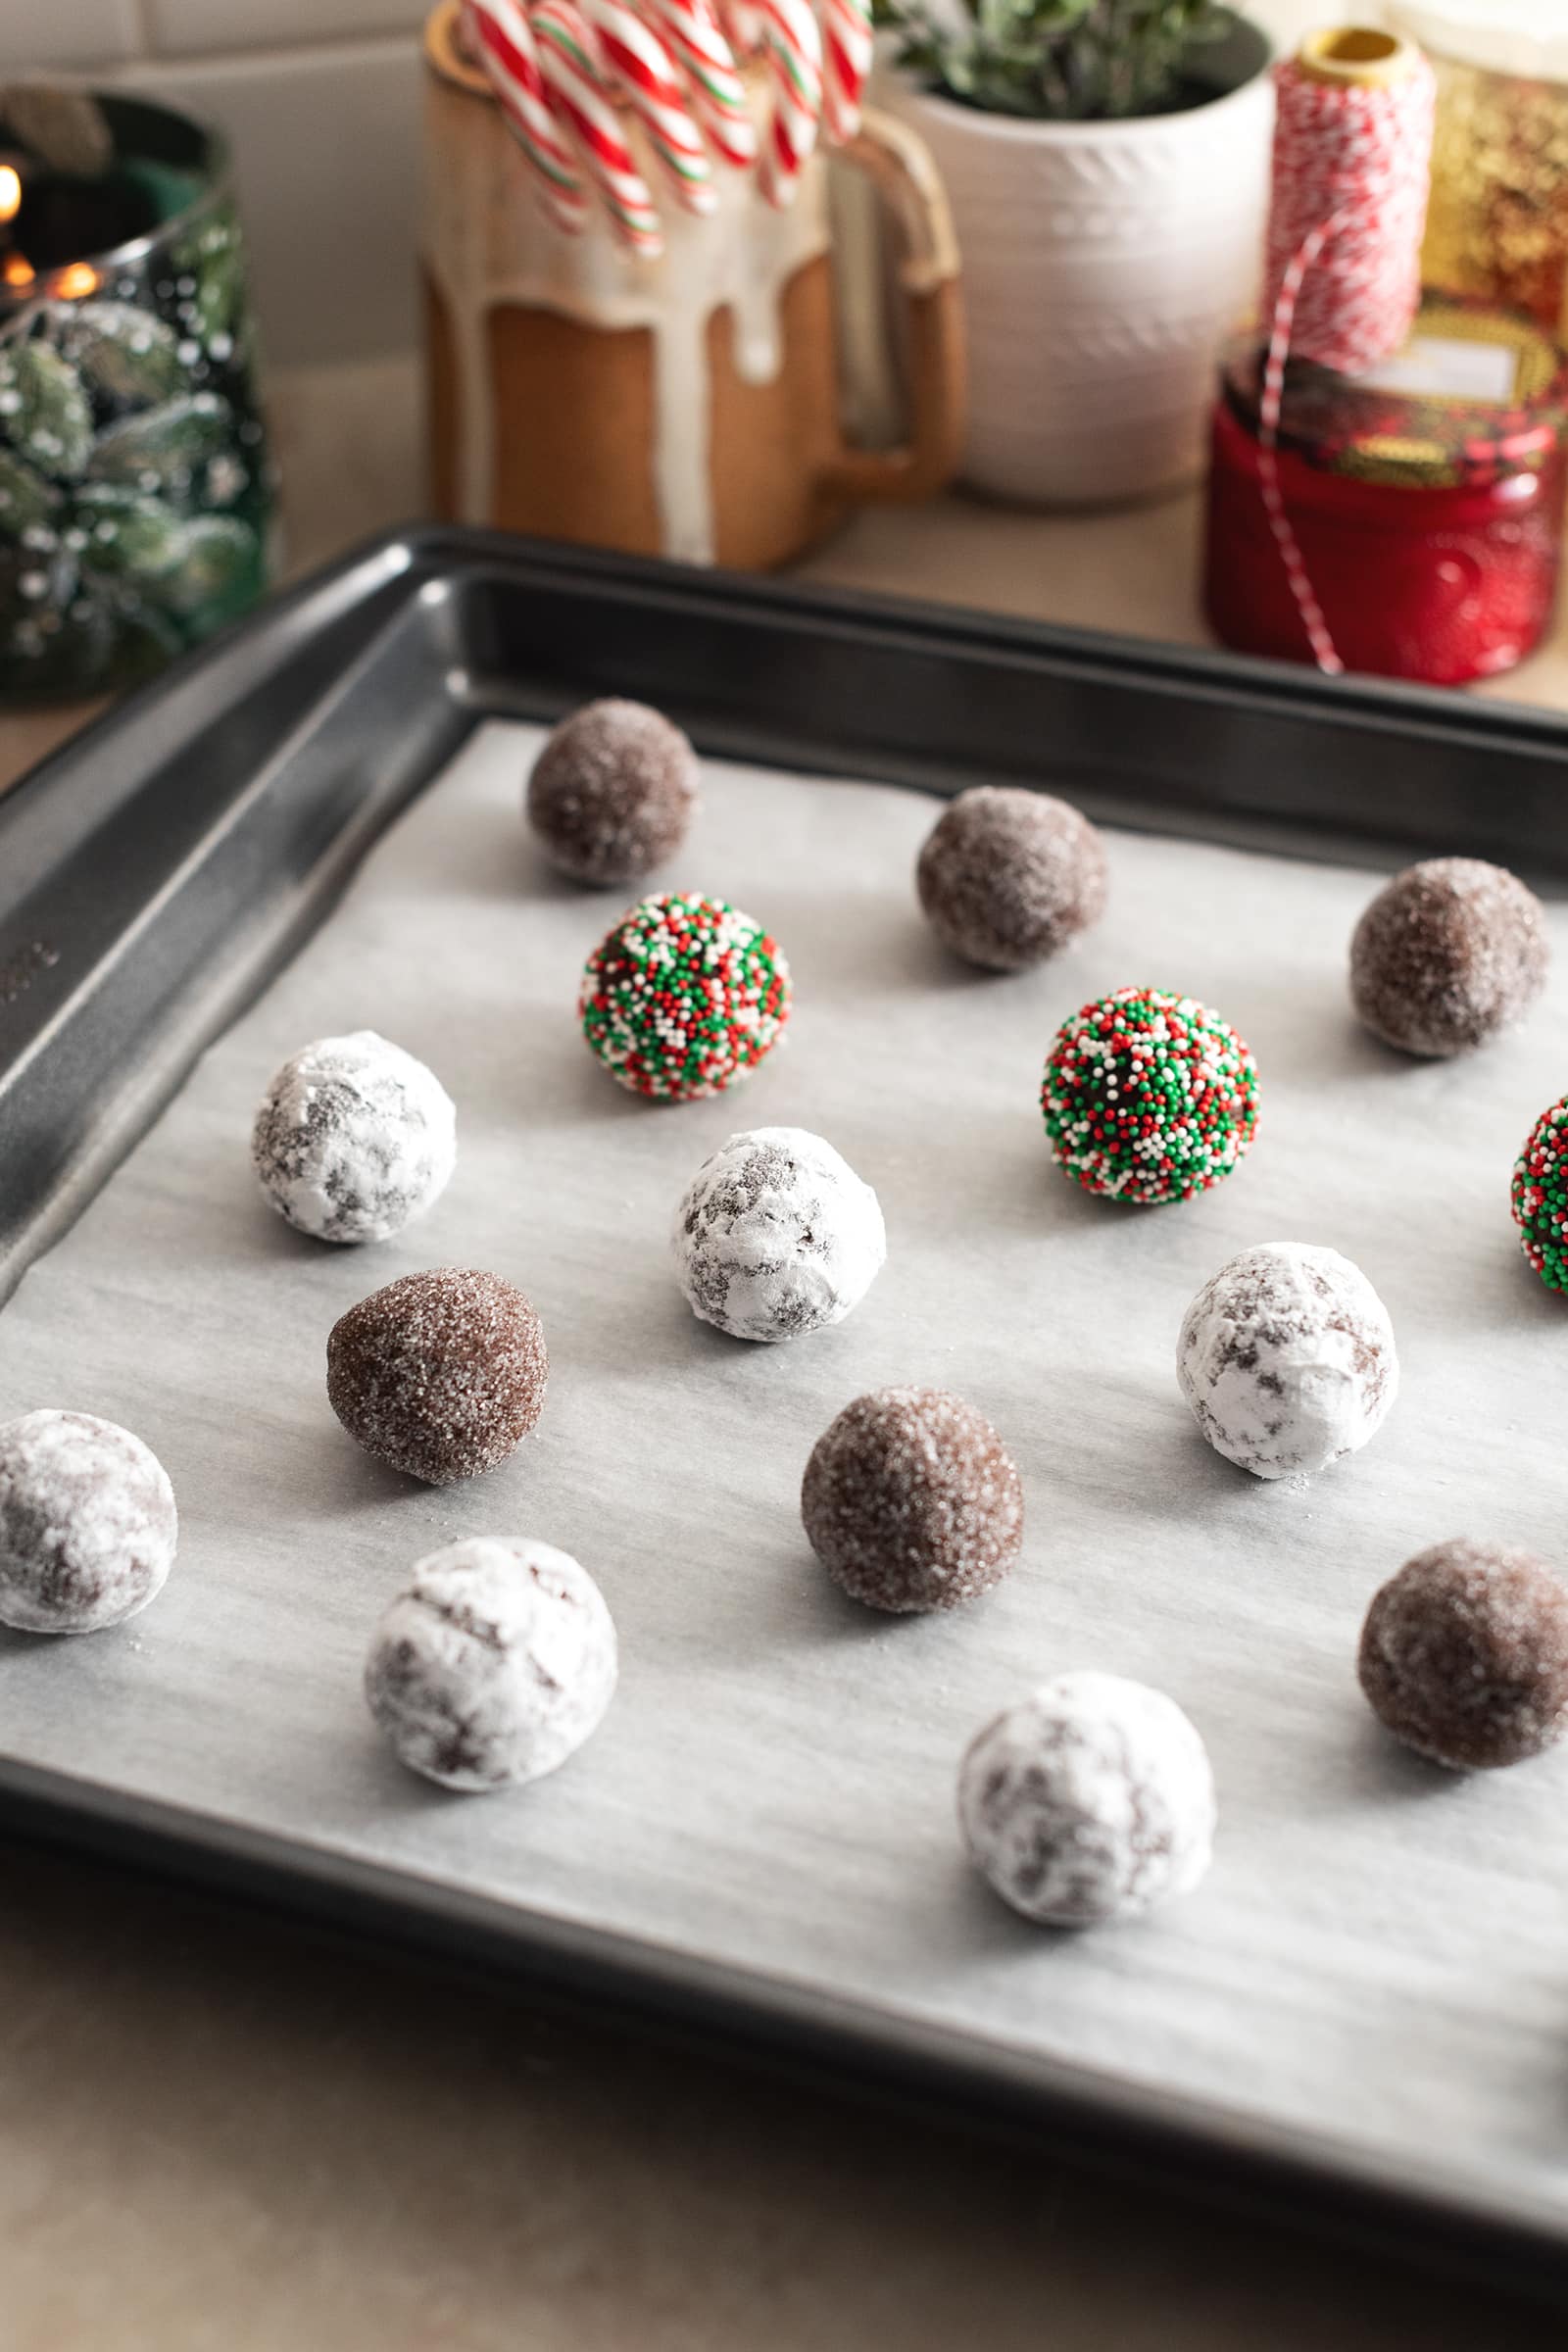 Balls of cookie dough coated in sugar and sprinkles arranged on a backing sheet.